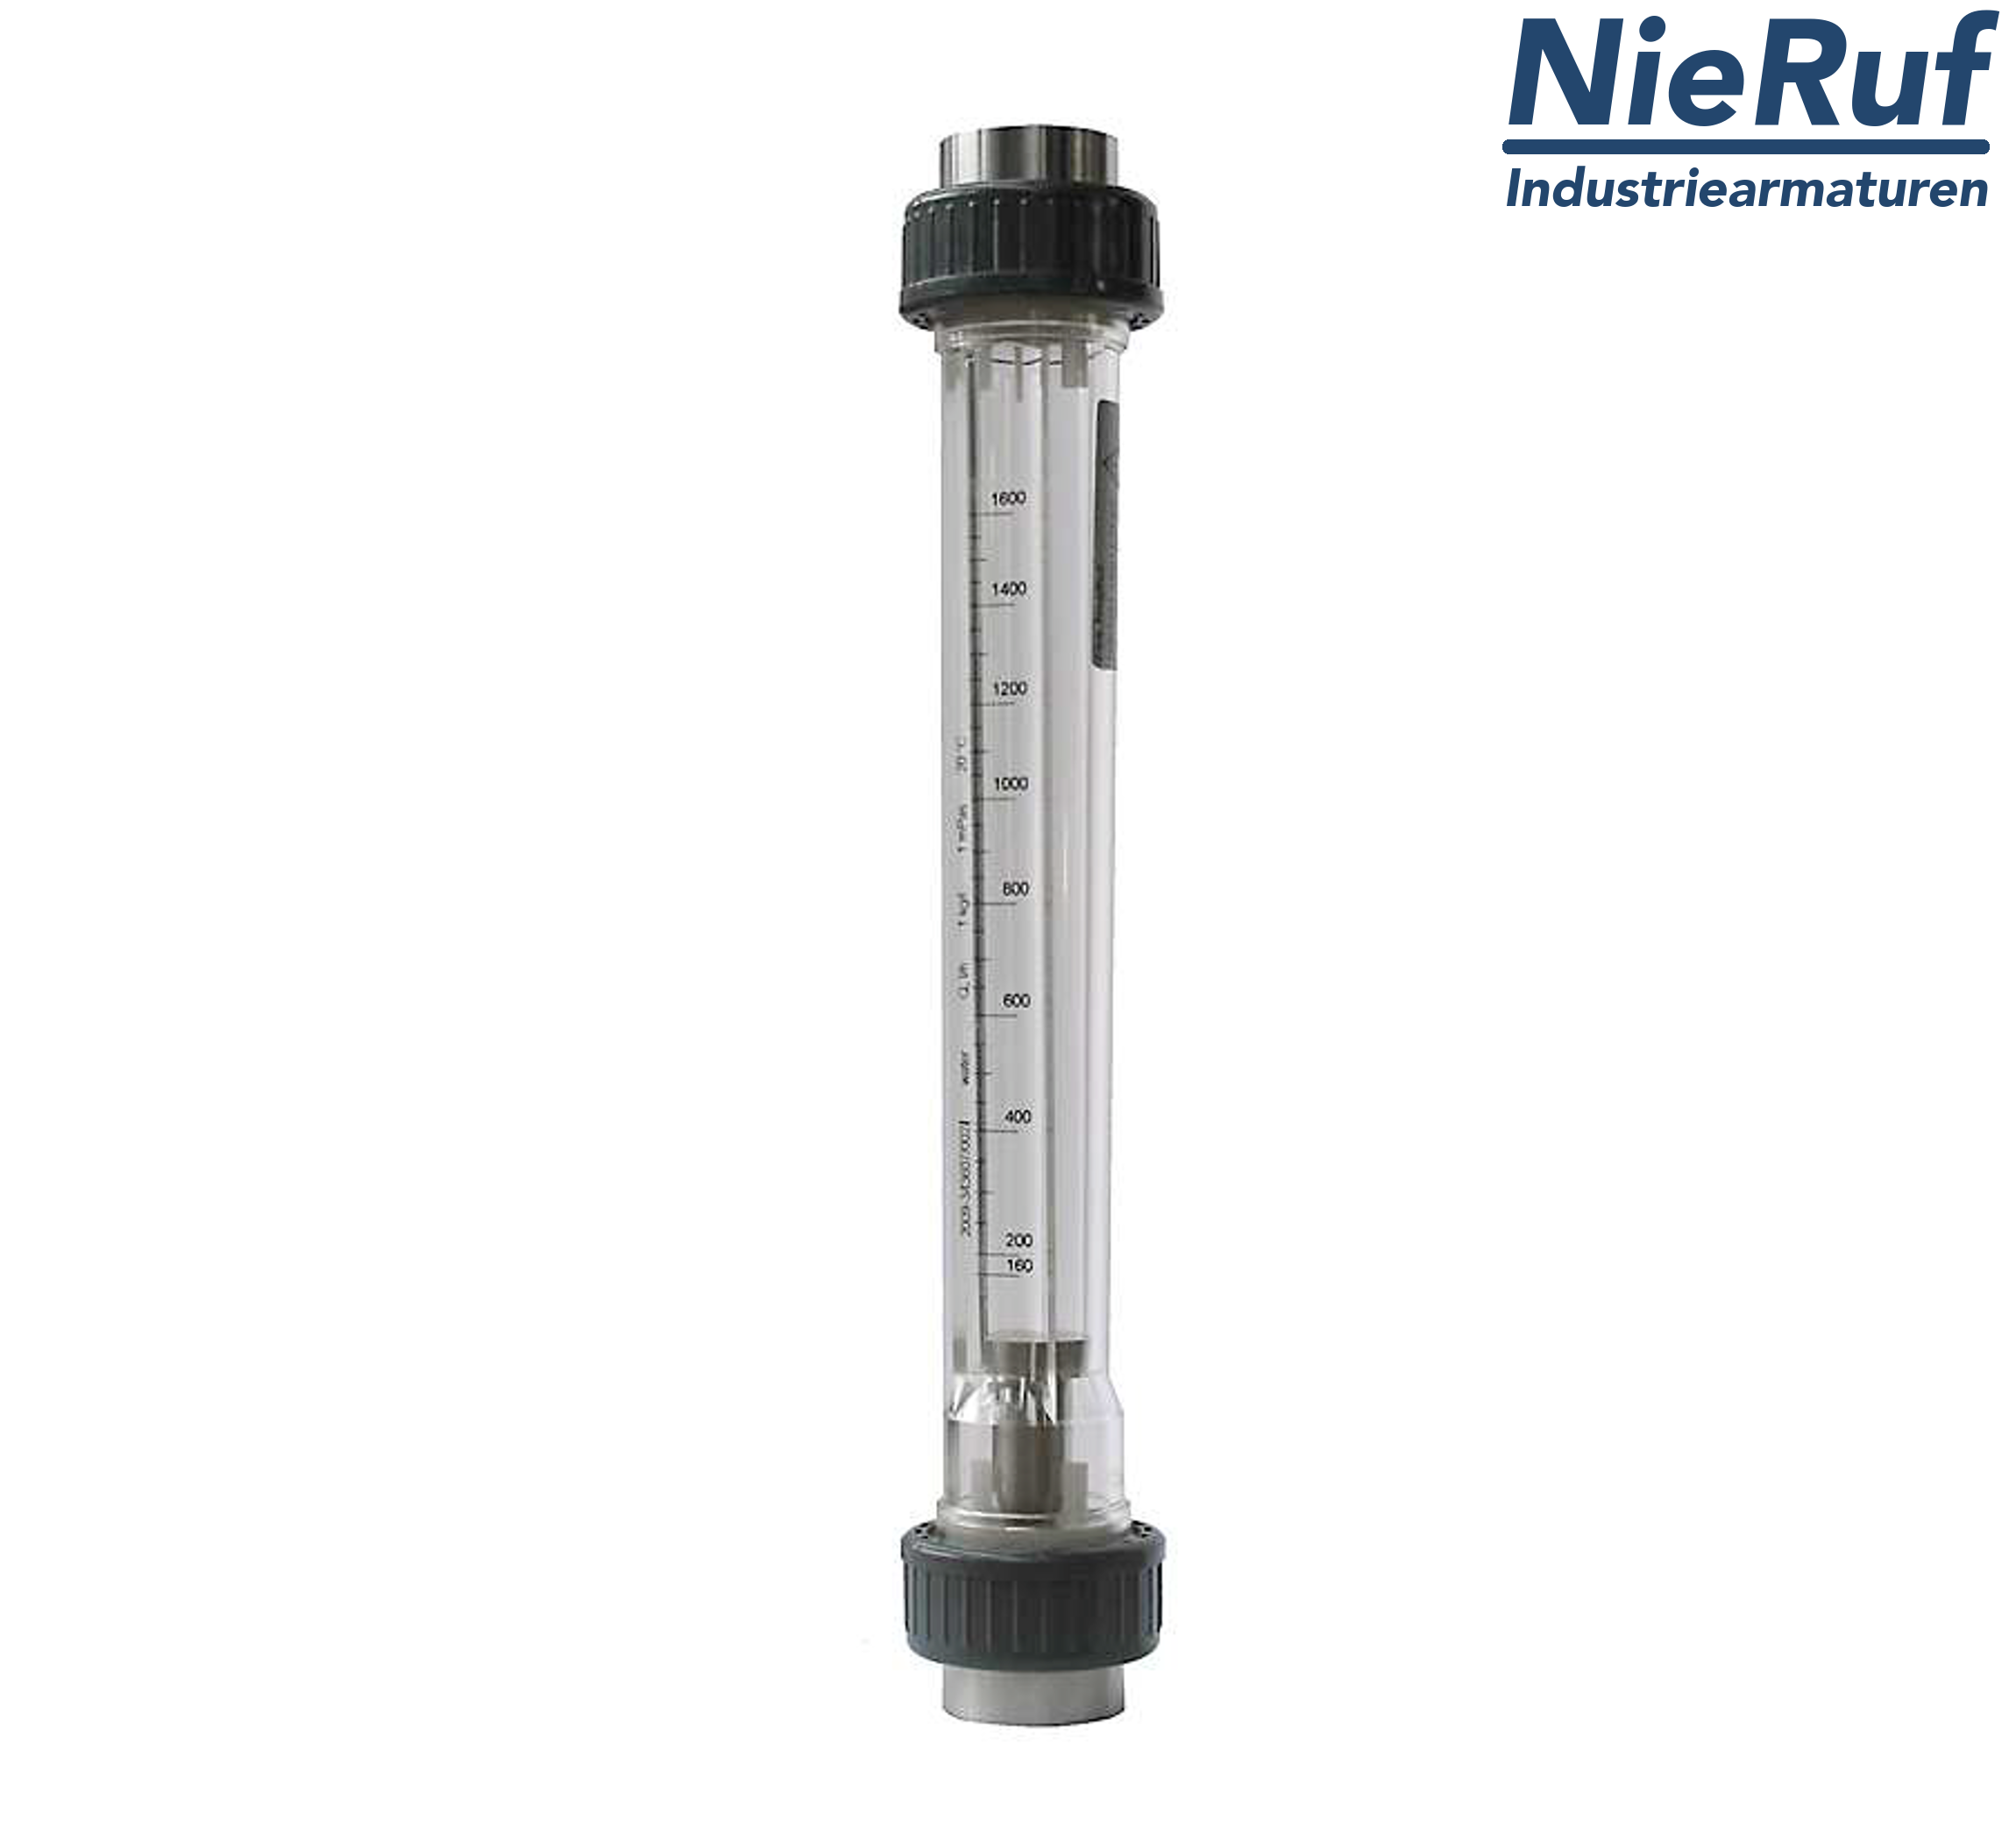 Variable area flowmeter 1" inch 100.0 - 1000 l/h water FKM